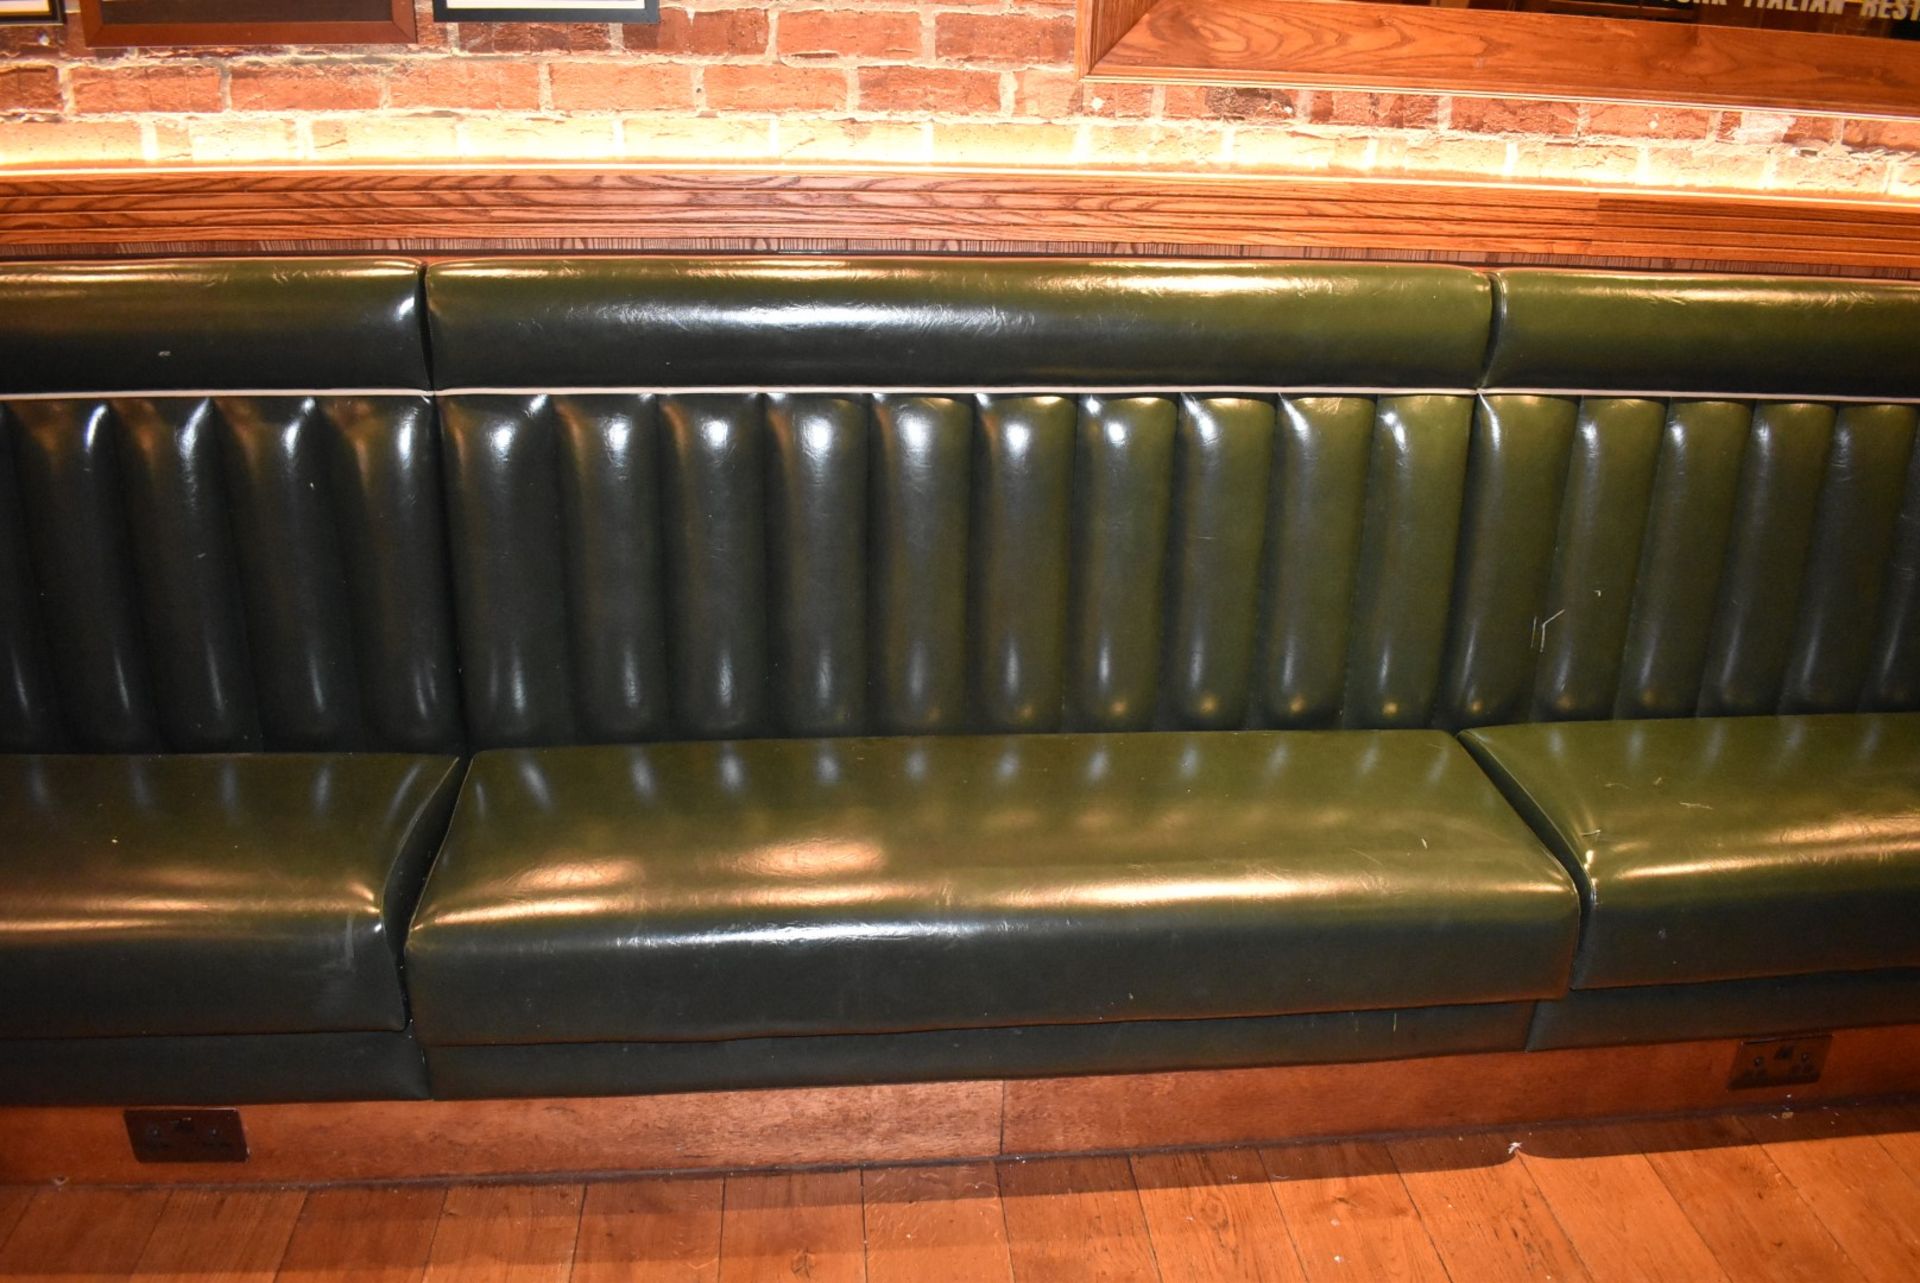 7.1-Metres Of Restaurant Booth Seating (5 x Sections) - Upholstered In Dark Green Faux Leather - Image 4 of 5